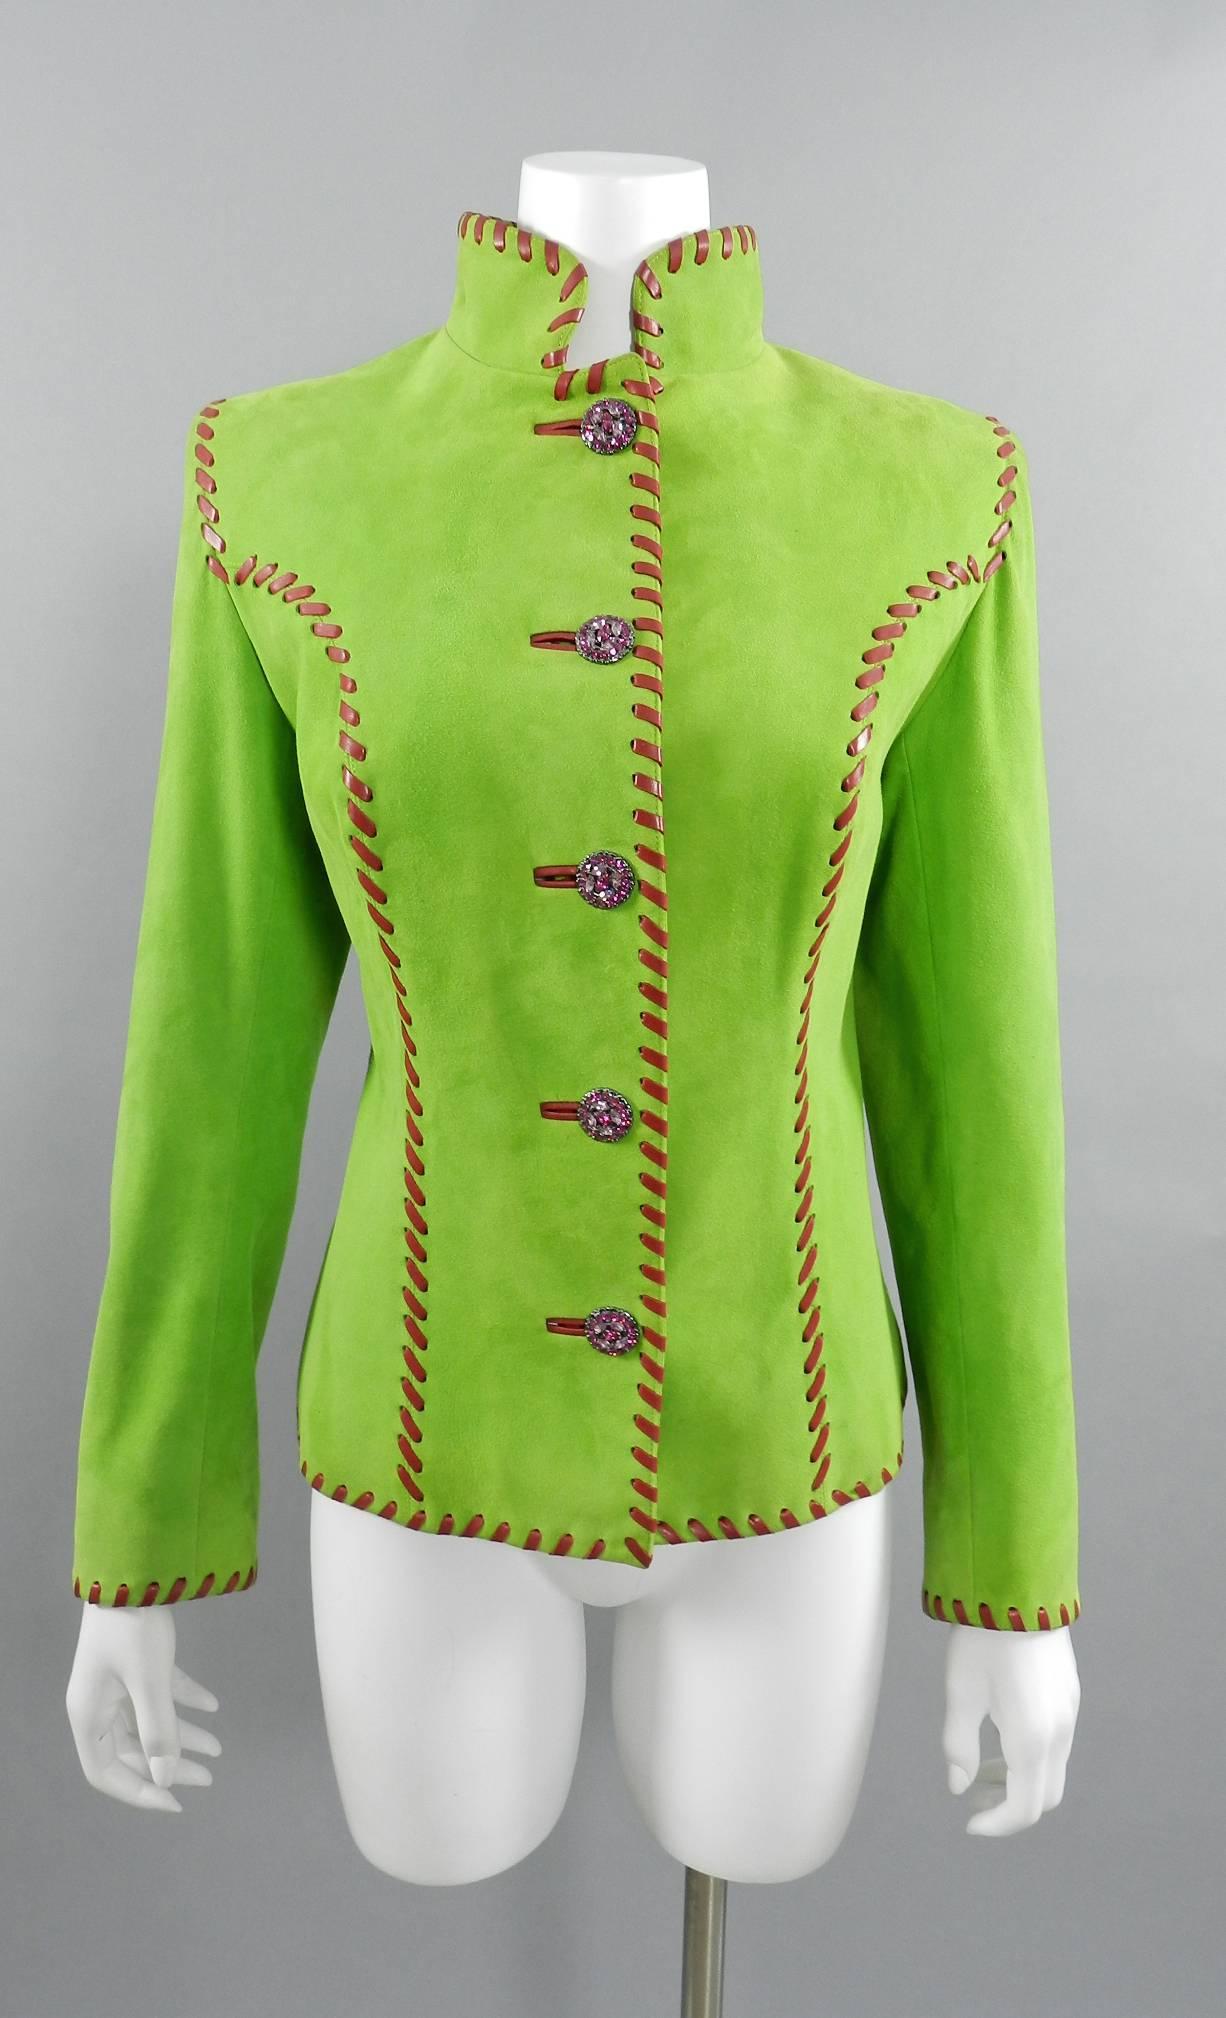 Yves Saint Laurent AW 1999 Haute Couture Lime Green and Fuchsia Suede Jacket For Sale 3